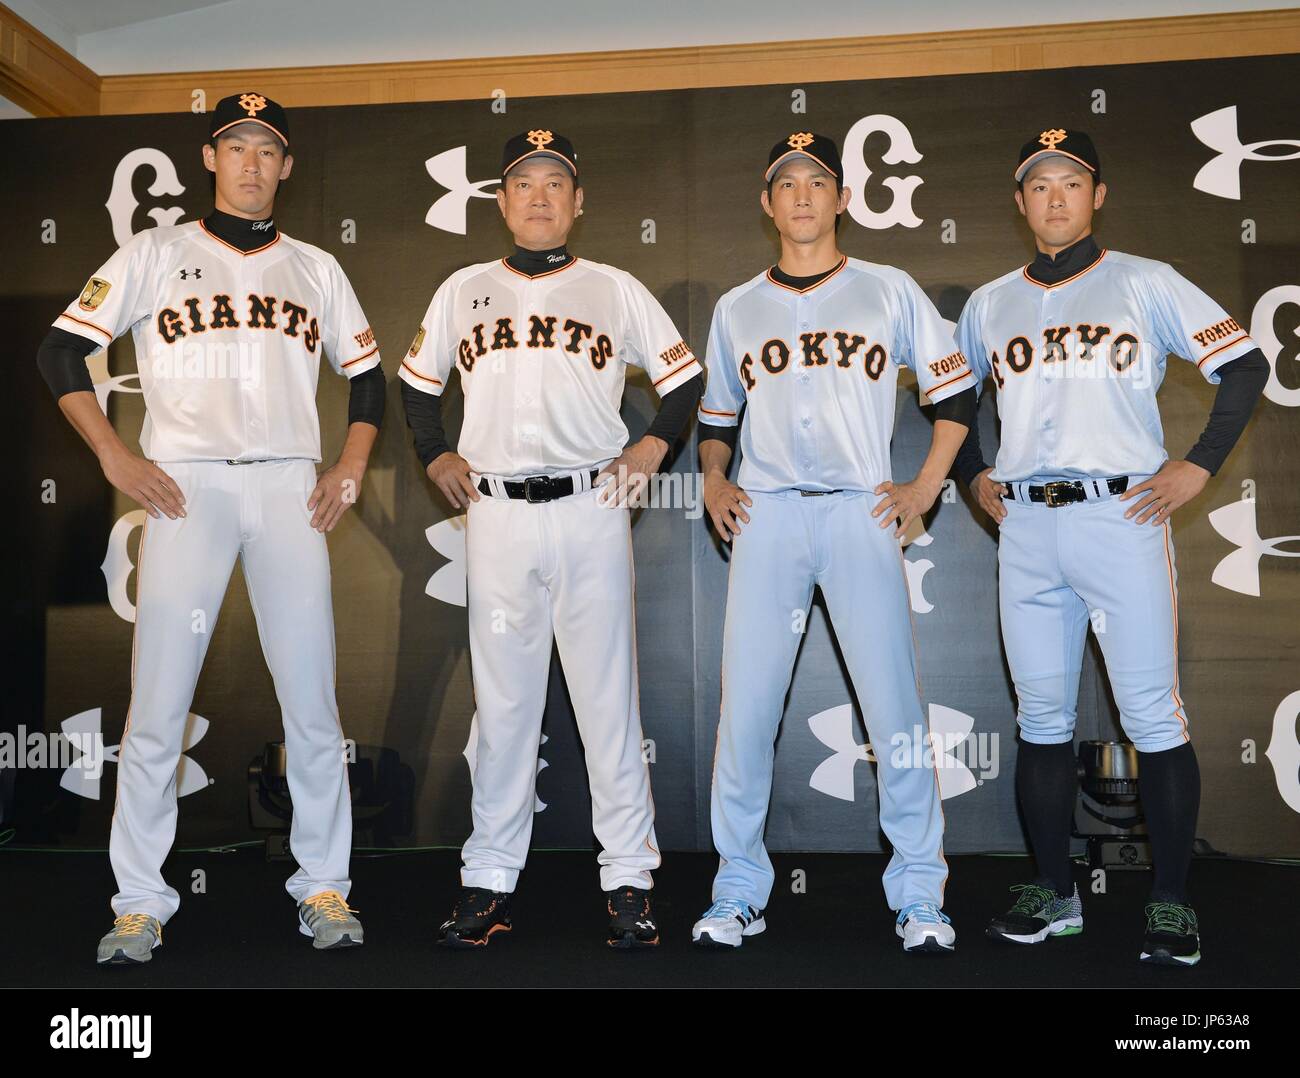 TOKYO, Japan - Yomiuri Giants manager Tatsunori Hara (2nd from L) joins  players of his team in showing off the Japanese professional baseball  club's new uniforms in Tokyo on Dec. 22, 2014,